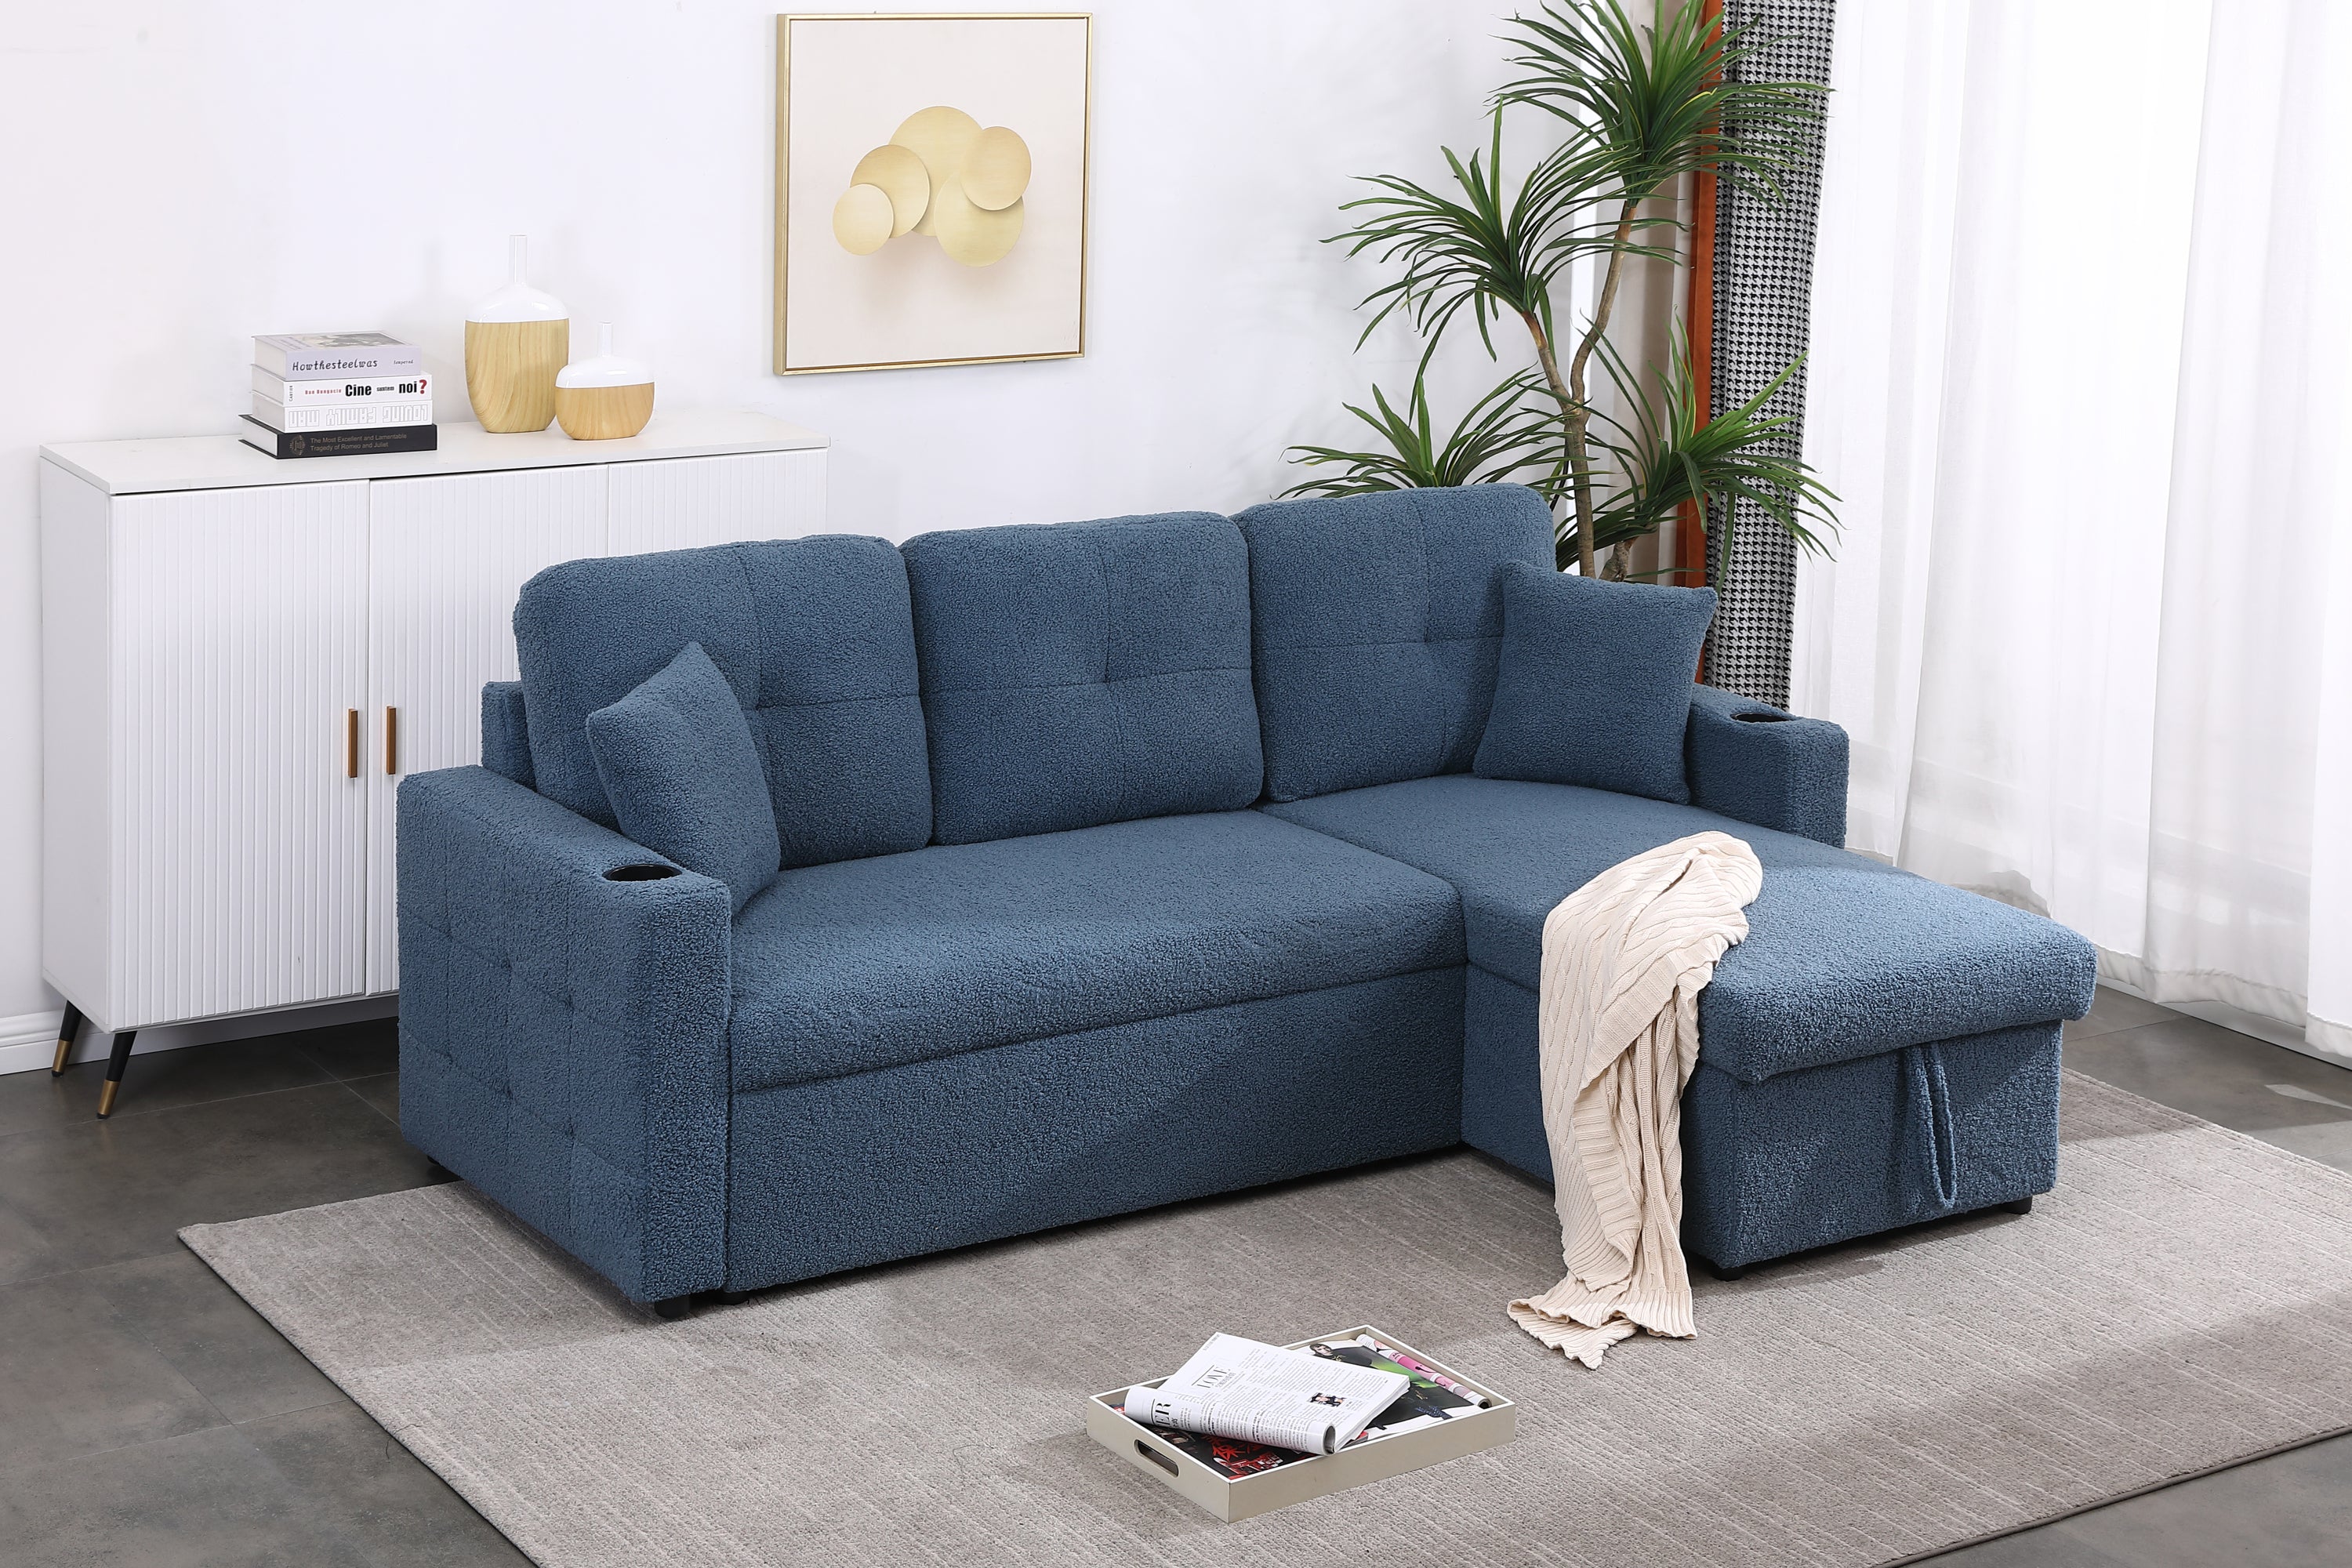 Blue Lamb Wool L Shaped Sleeper Sectional Sofa w/ Storage Chaise-Sleeper Sectionals-American Furniture Outlet